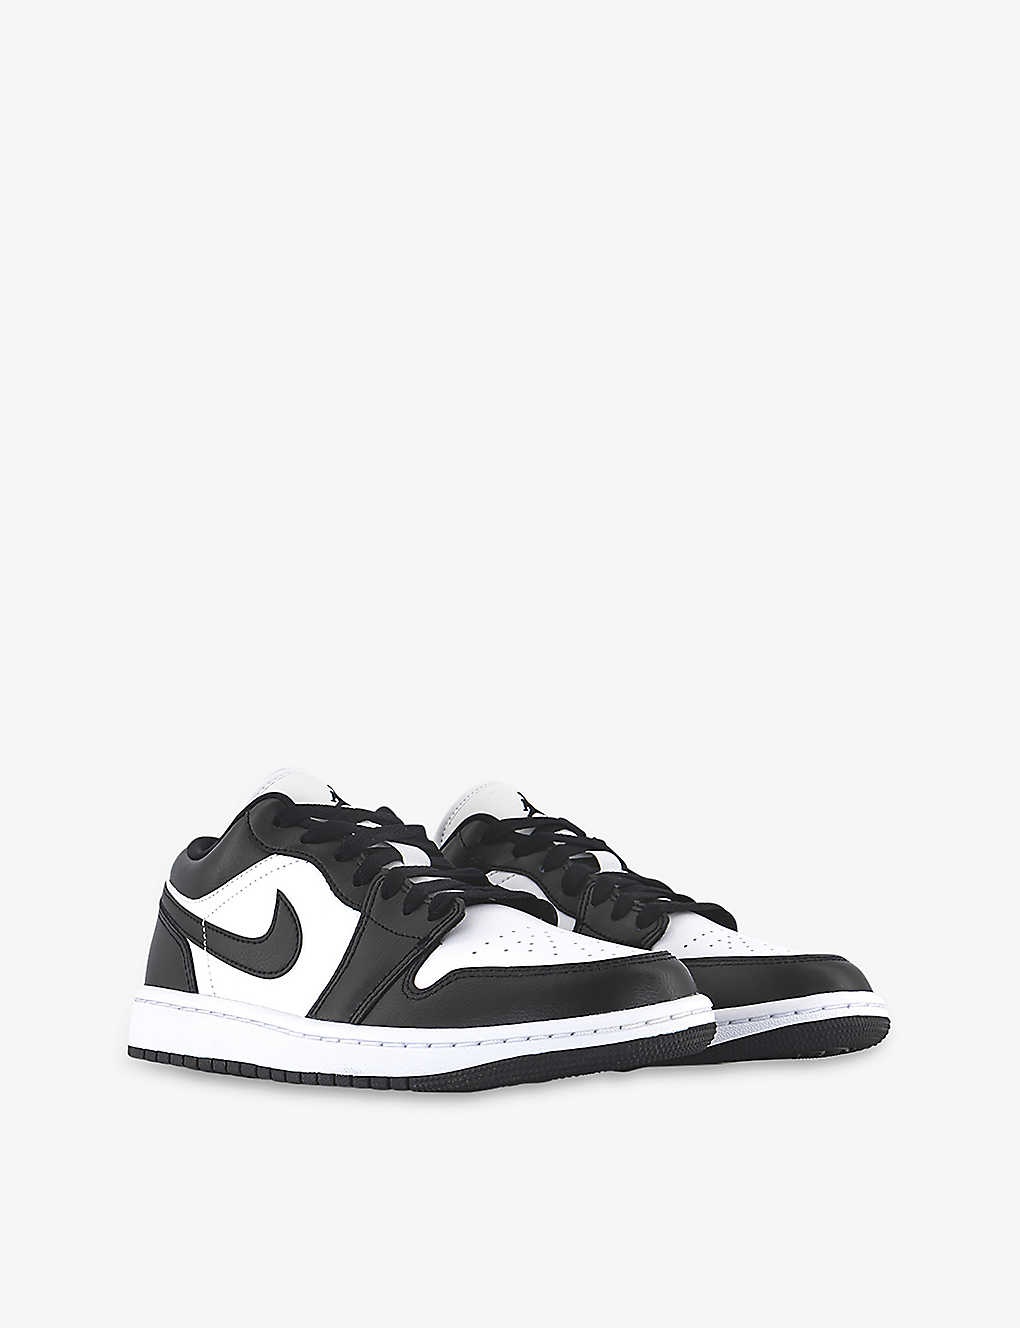 Air Jordan 1 Low chunky sole leather low-top trainers - 3